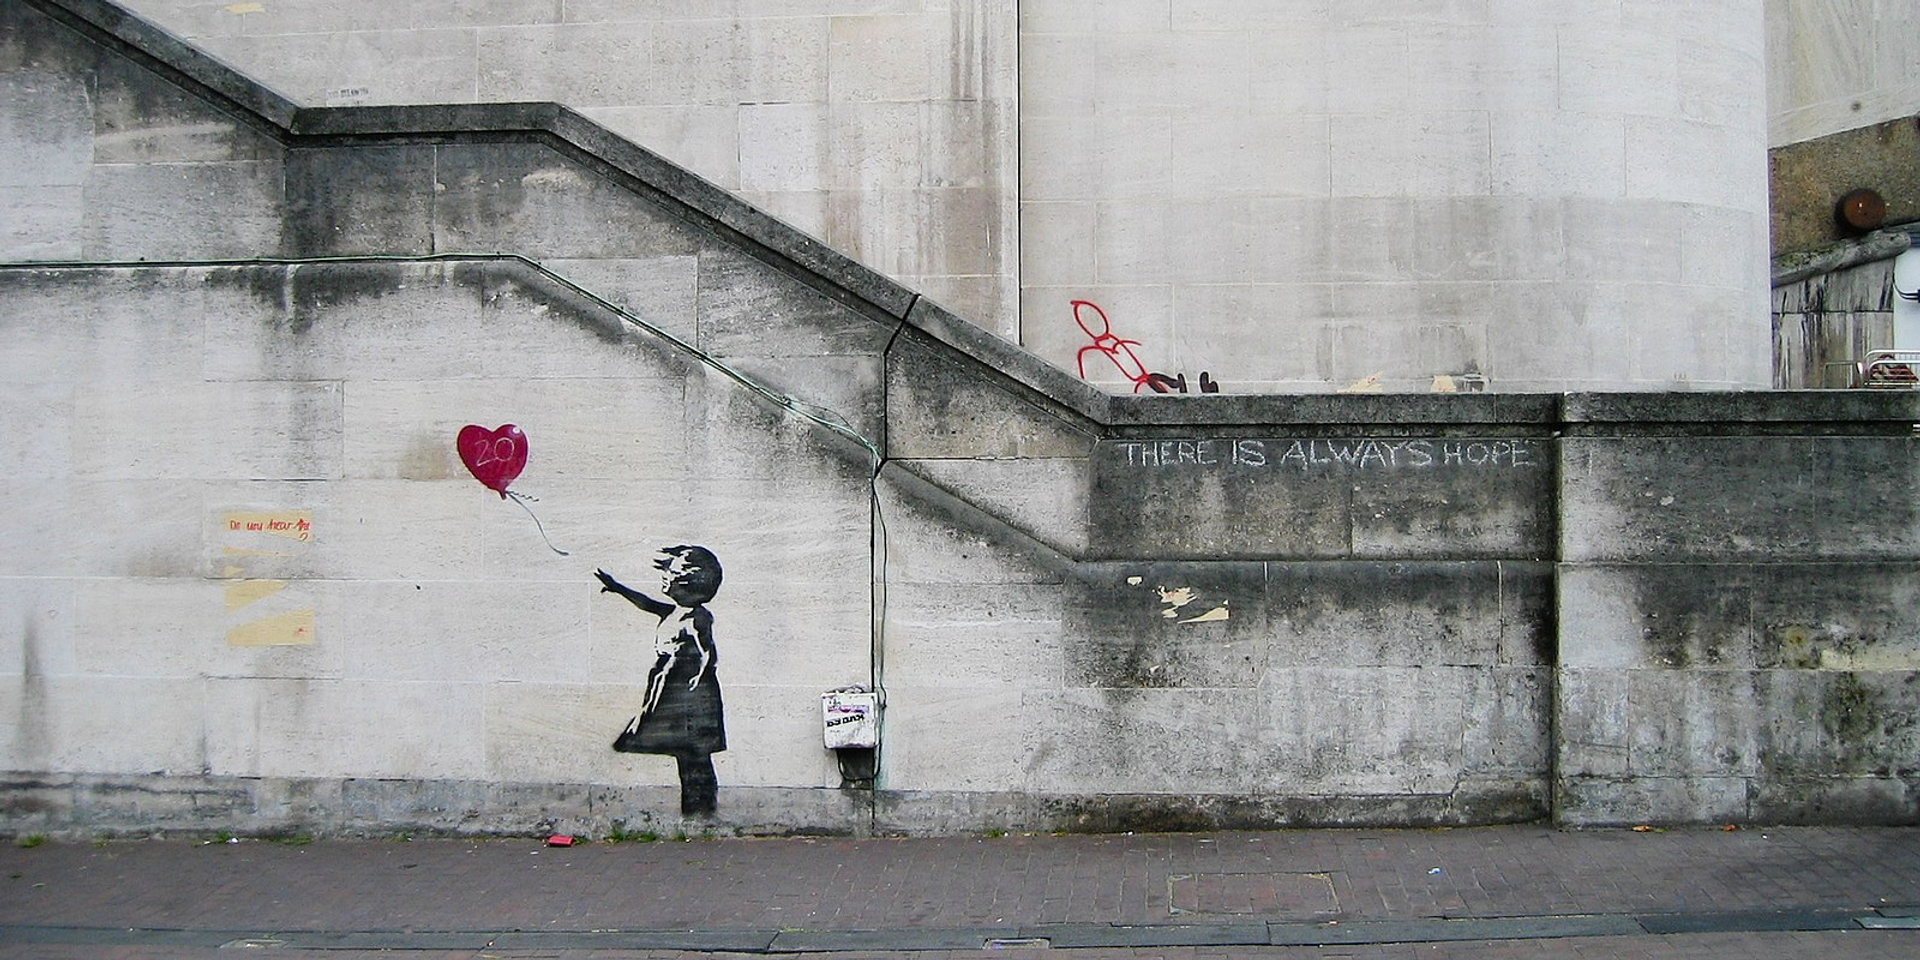 An image of a cityscape with the Girl With Balloon artwork by Banksy, depicting a young girl reaching out for a red, heart shaped balloon.